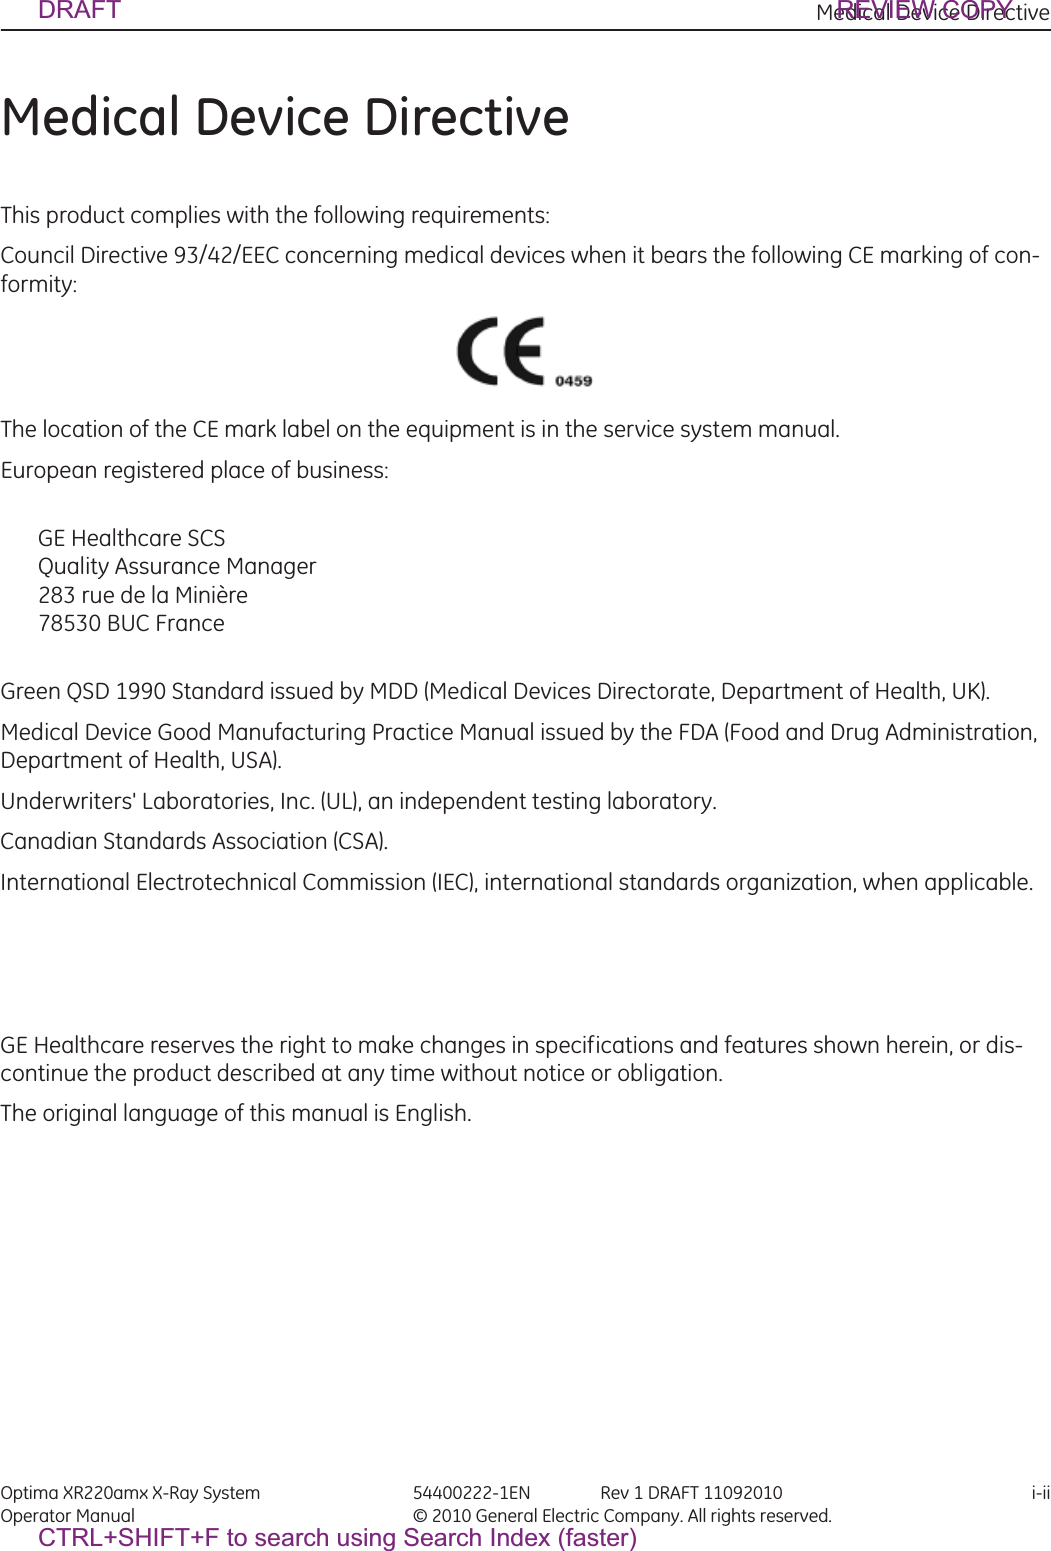 Medical Device Directive Optima XR220amx X-Ray System 54400222-1EN Rev 1 DRAFT 11092010 i-iiOperator Manual © 2010 General Electric Company. All rights reserved.Medical Device DirectiveThis product complies with the following requirements:Council Directive 93/42/EEC concerning medical devices when it bears the following CE marking of con-formity:The location of the CE mark label on the equipment is in the service system manual.European registered place of business:GE Healthcare SCSQuality Assurance Manager283 rue de la Minière78530 BUC FranceGreen QSD 1990 Standard issued by MDD (Medical Devices Directorate, Department of Health, UK).Medical Device Good Manufacturing Practice Manual issued by the FDA (Food and Drug Administration, Department of Health, USA).Underwriters&apos; Laboratories, Inc. (UL), an independent testing laboratory.Canadian Standards Association (CSA).International Electrotechnical Commission (IEC), international standards organization, when applicable.GE Healthcare reserves the right to make changes in specifications and features shown herein, or dis-continue the product described at any time without notice or obligation.The original language of this manual is English.DRAFT REVIEW COPYCTRL+SHIFT+F to search using Search Index (faster)